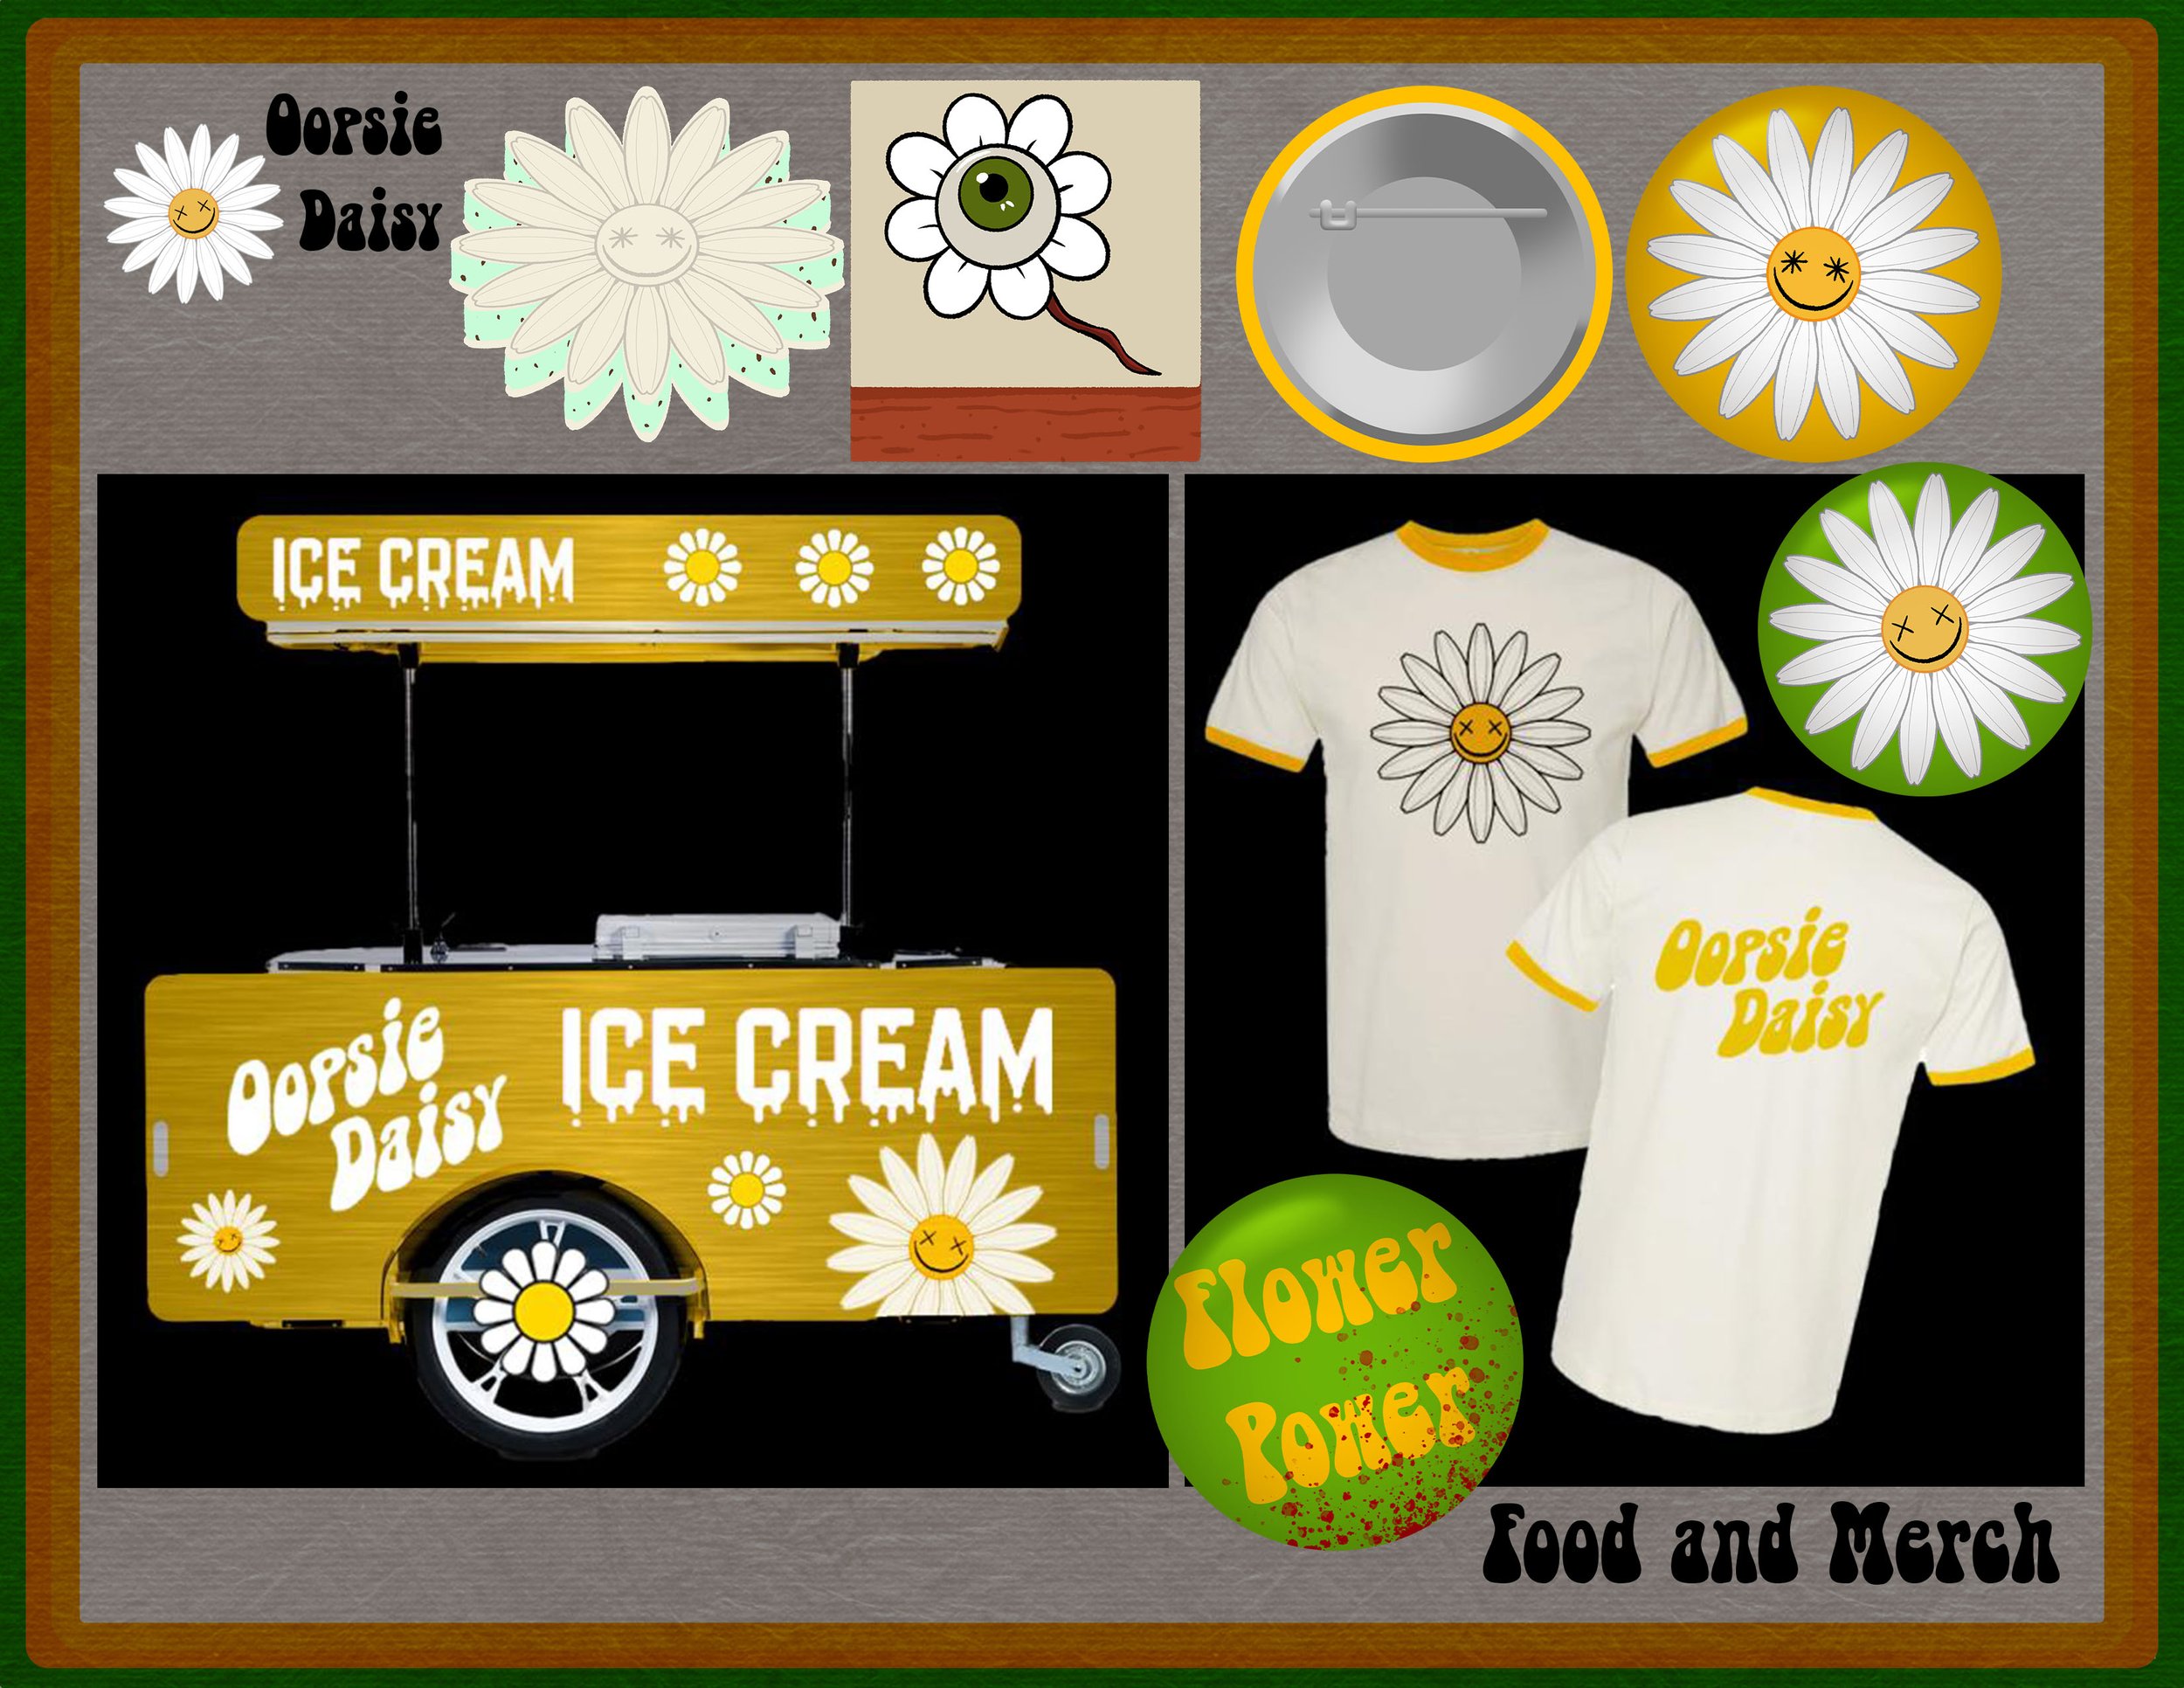 Food and Merch Concept